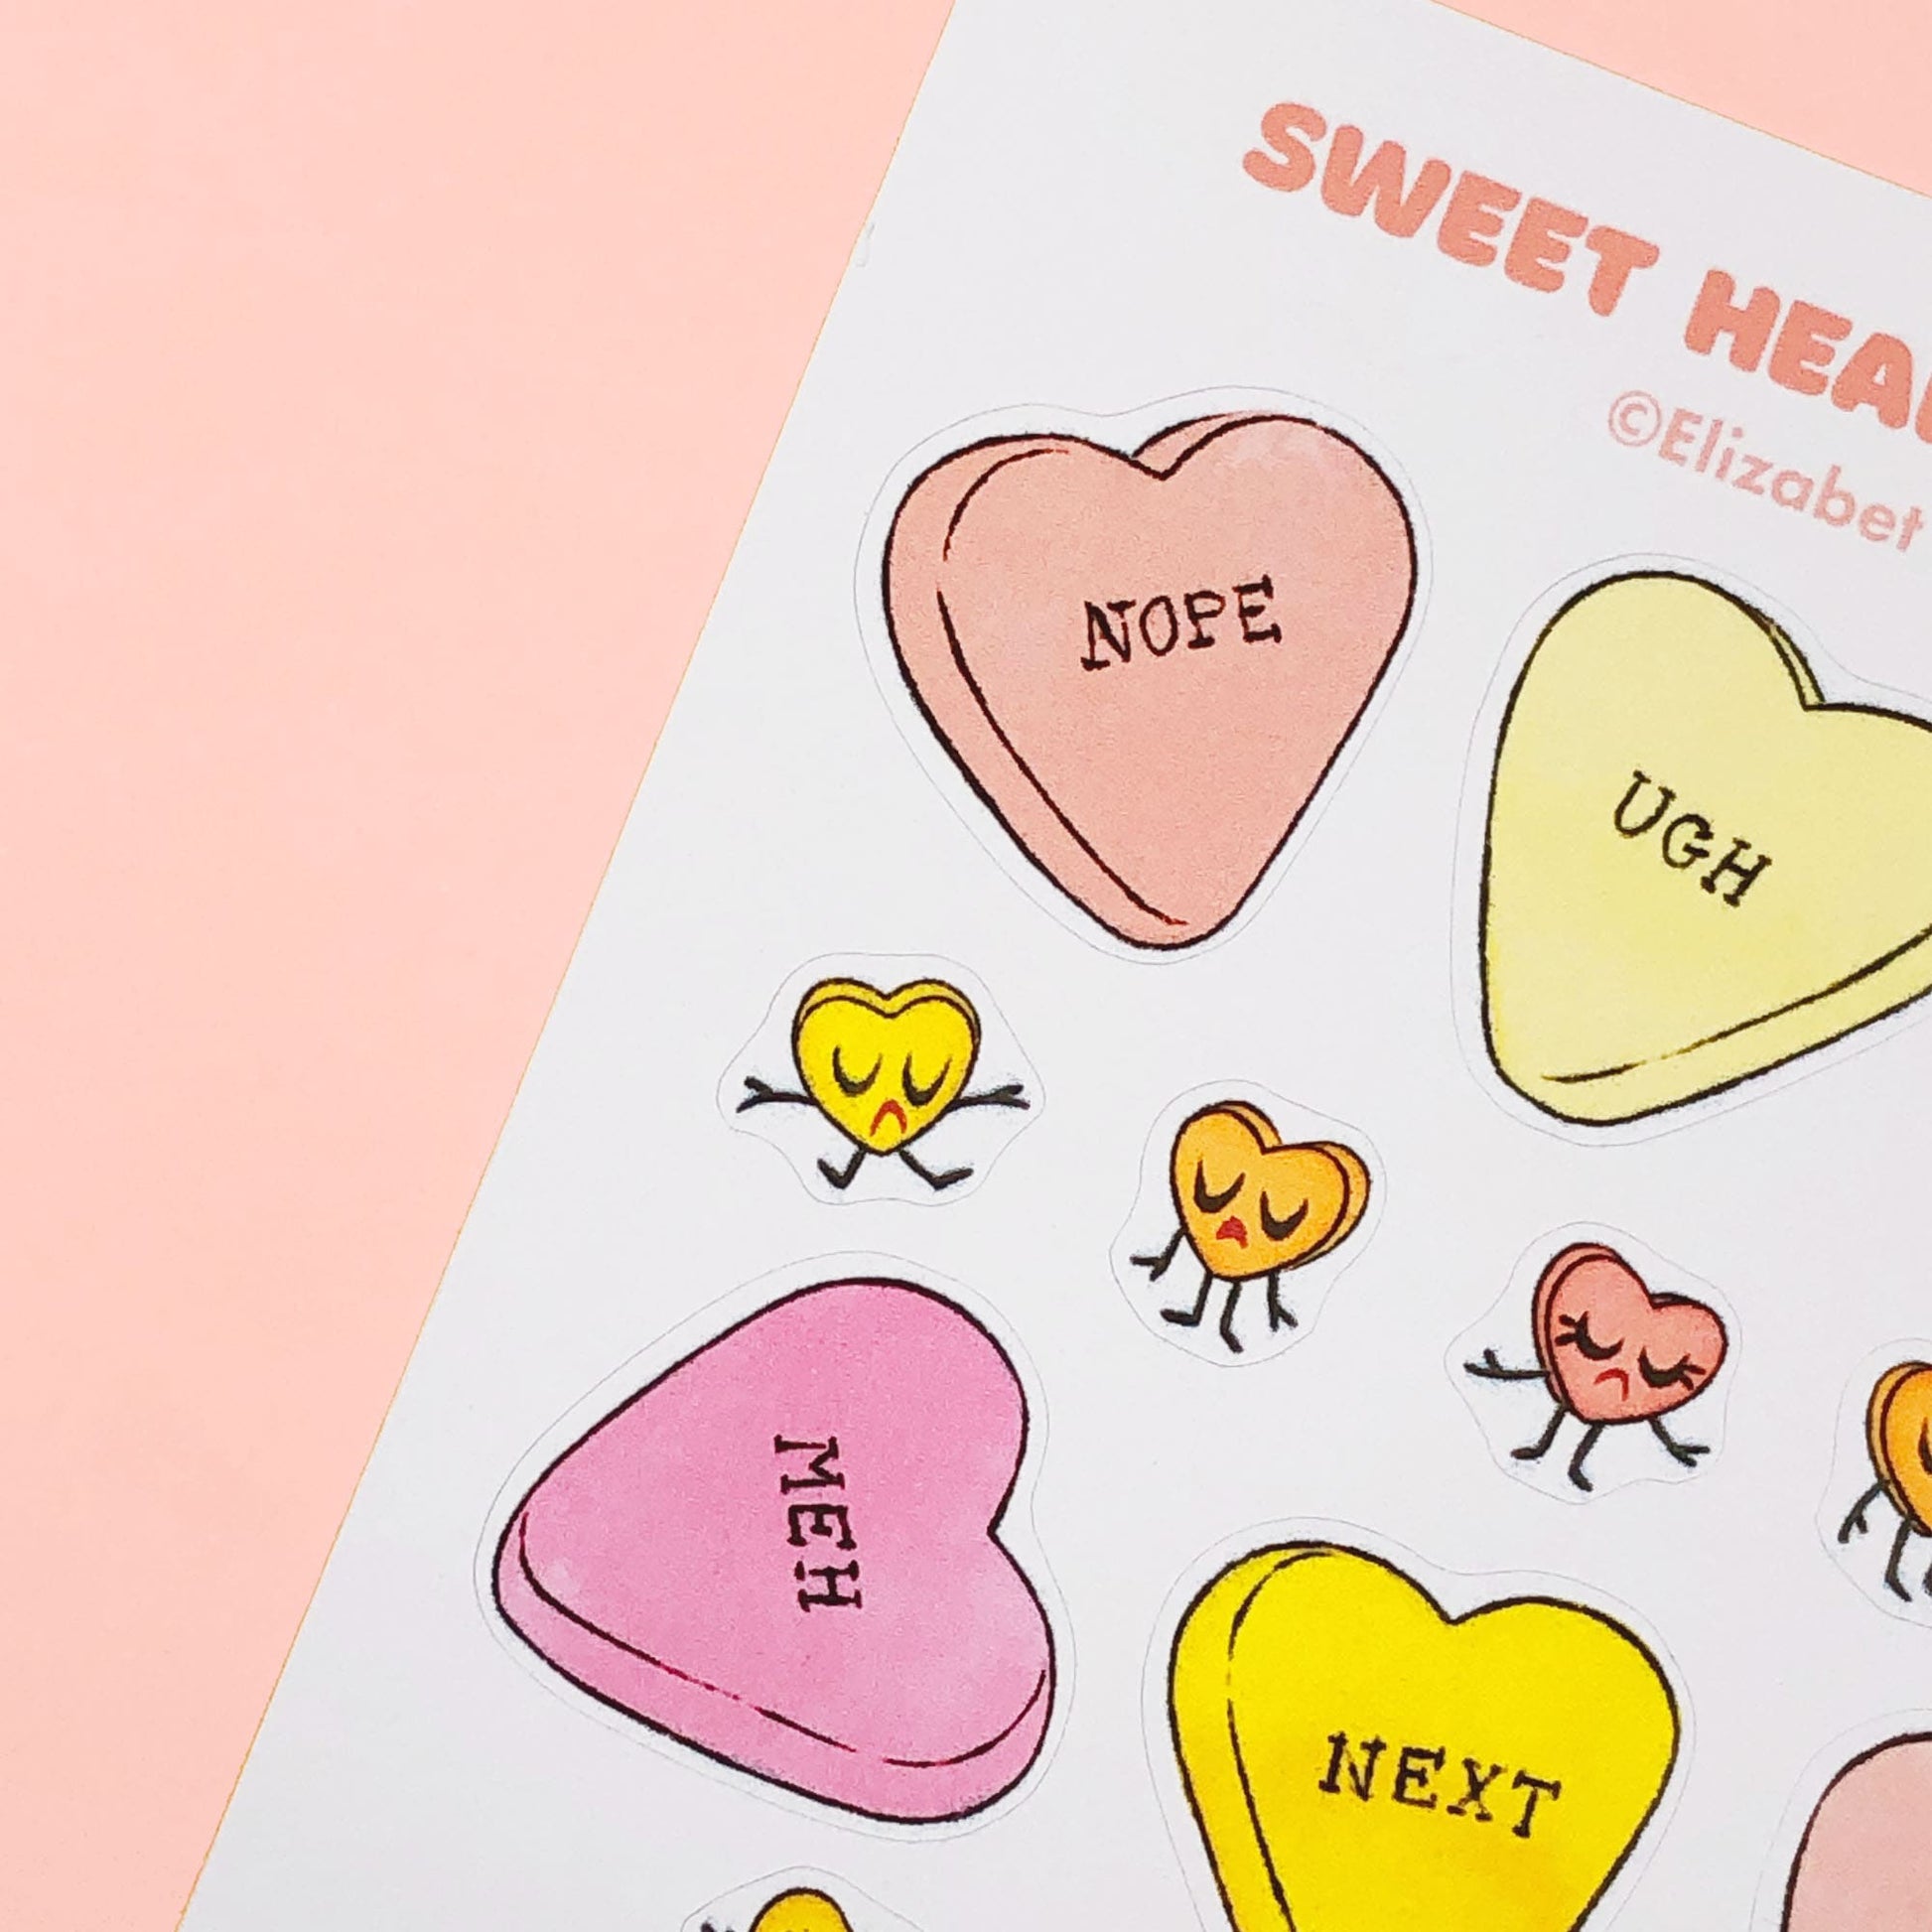 Anti valentines conversation candy hearts stickers.